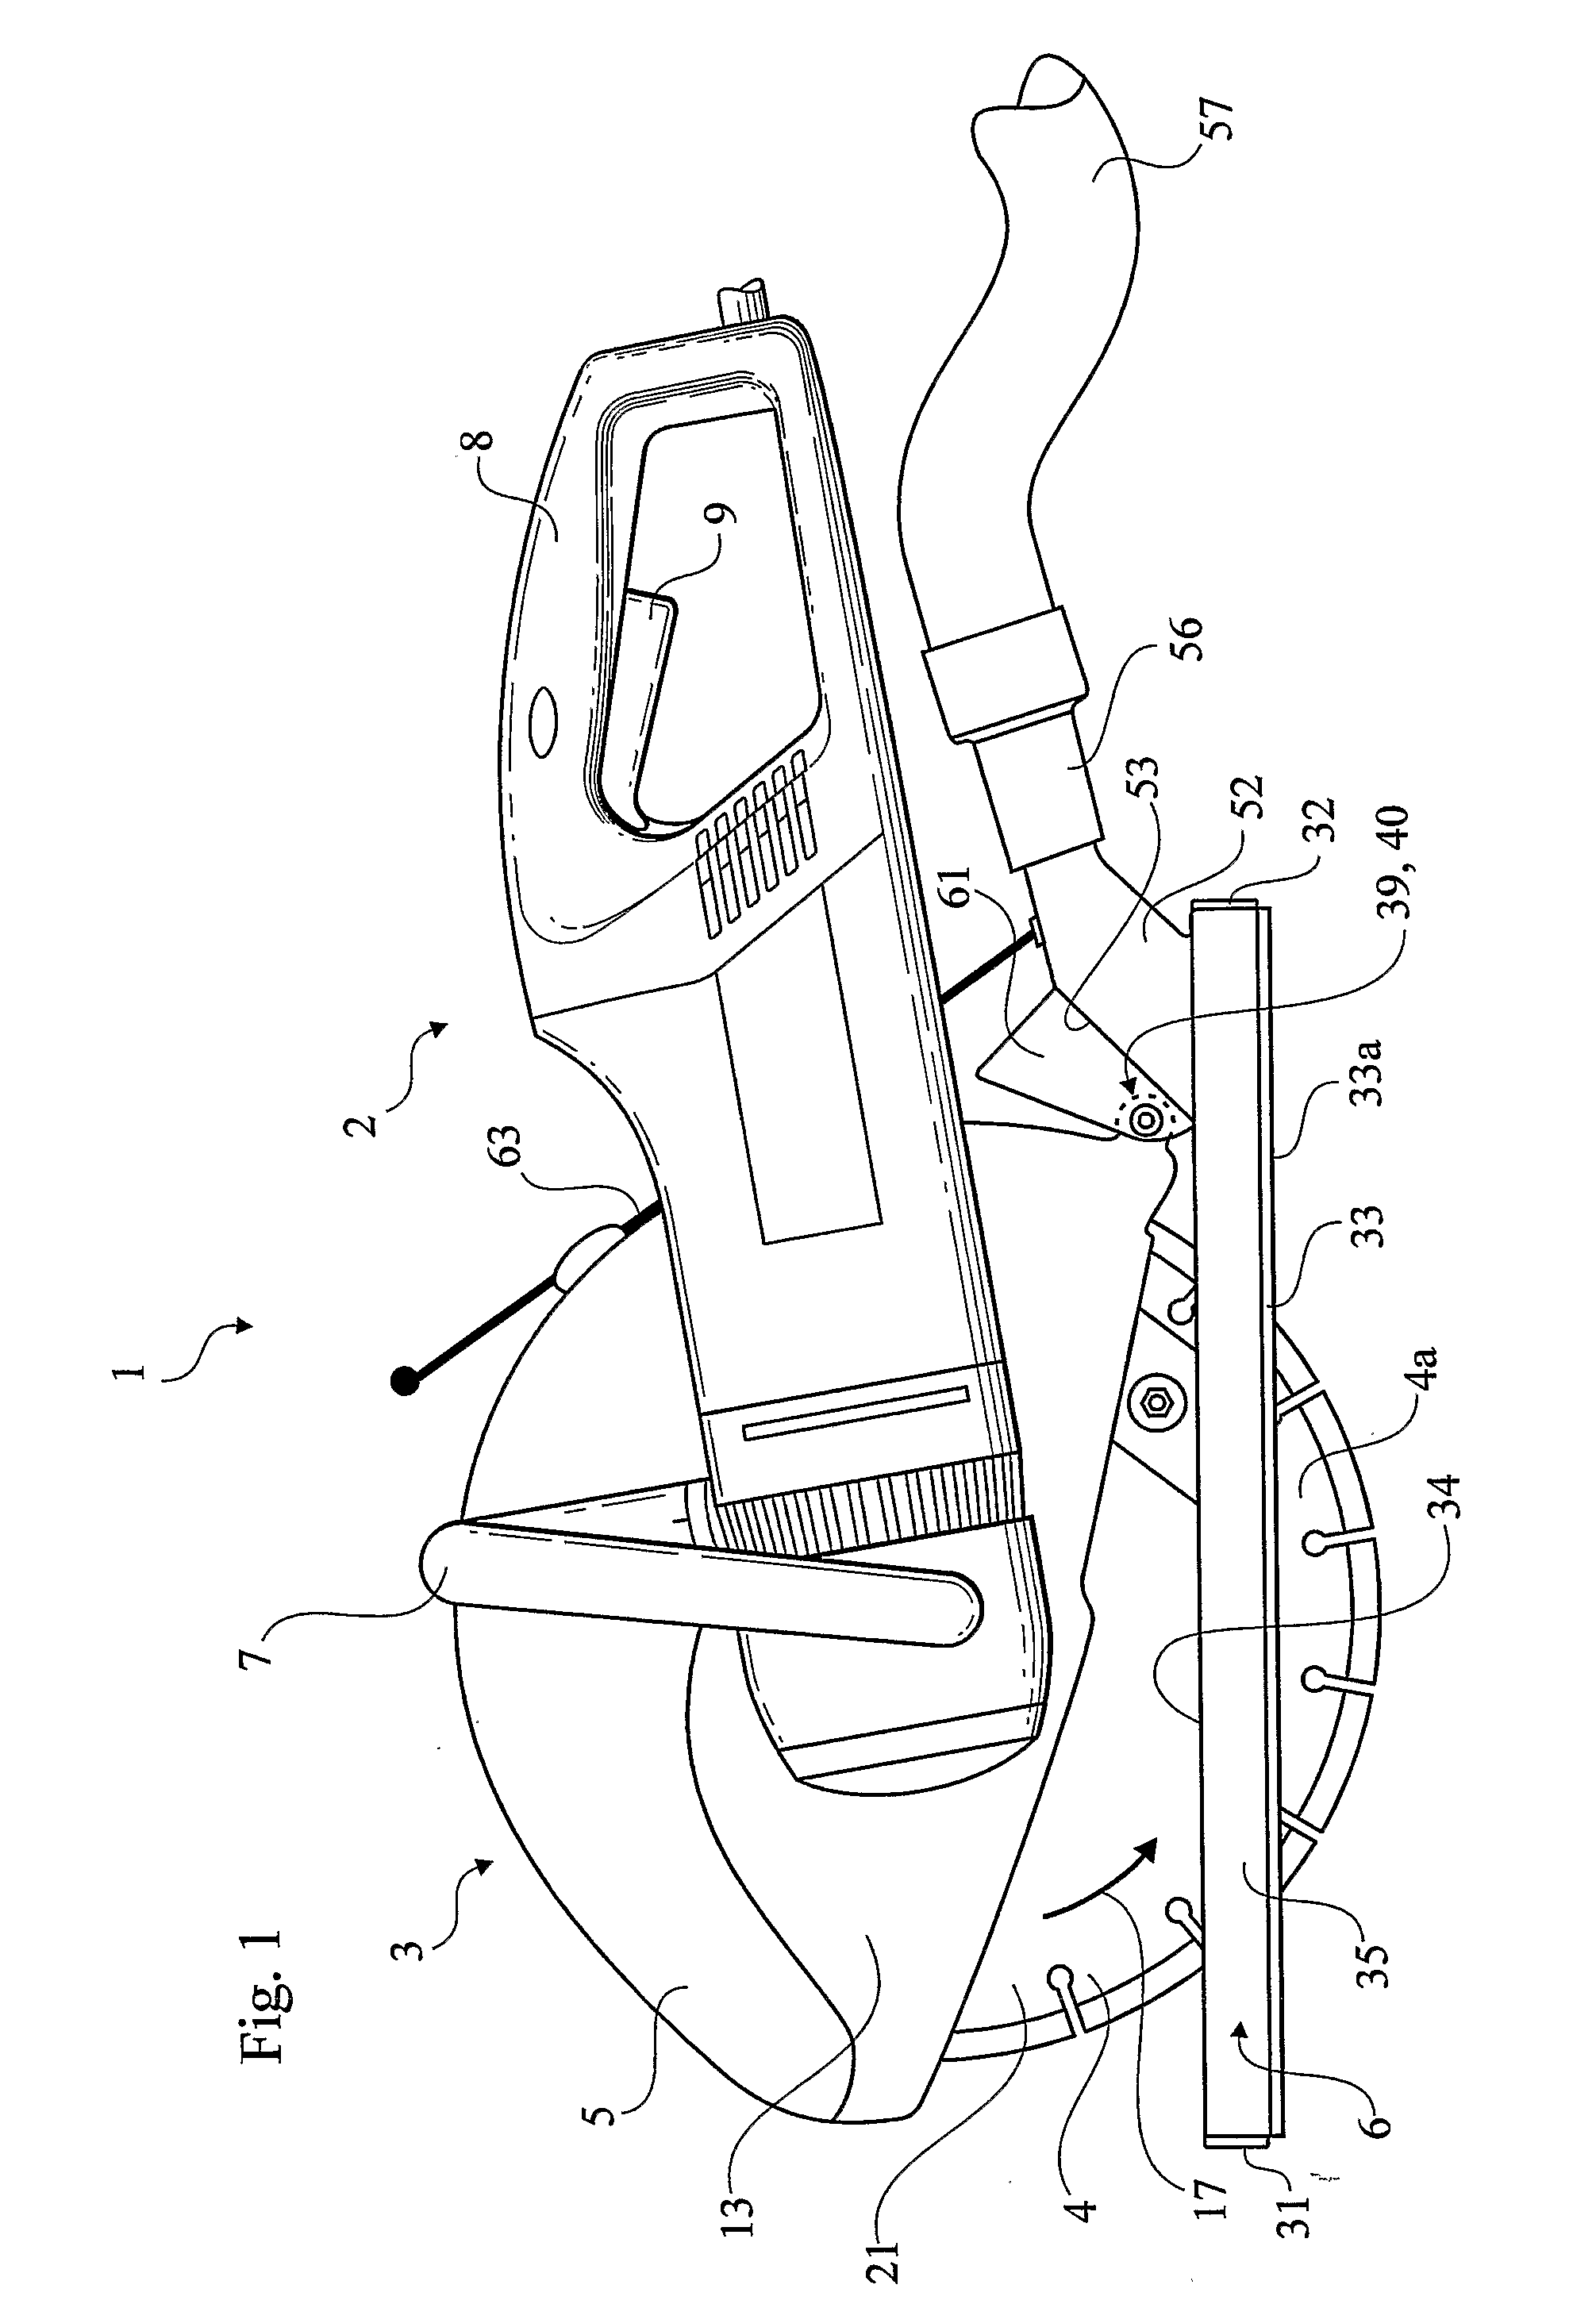 Cutting and Dust Collecting Assembly and Working Machine with Such Assembly